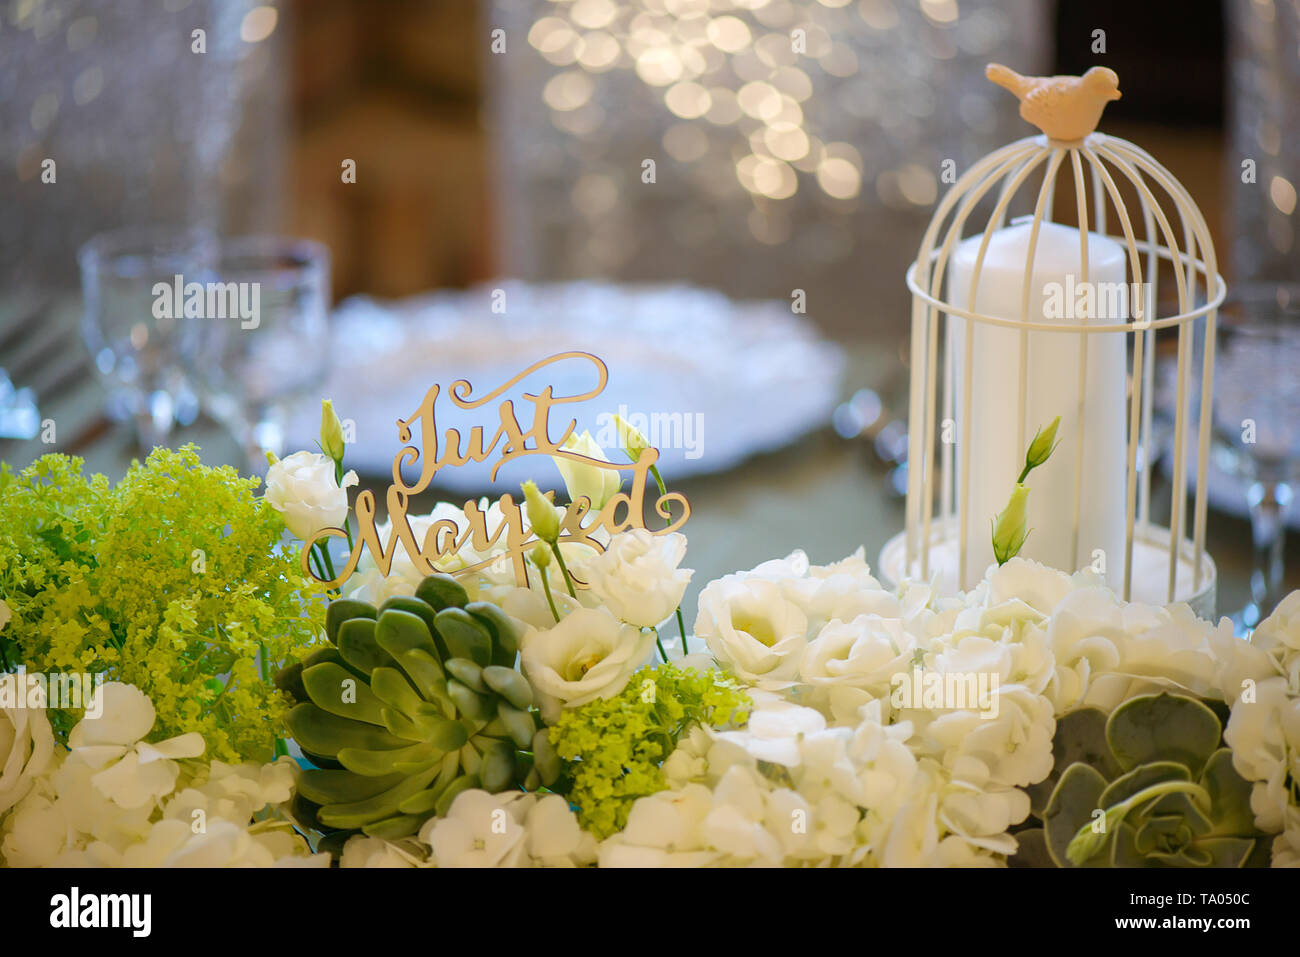 Wedding romantic decor for bride and groom dinner table with white vintage decorative bird cage holding a white candle and mixed flowers bouquet Stock Photo